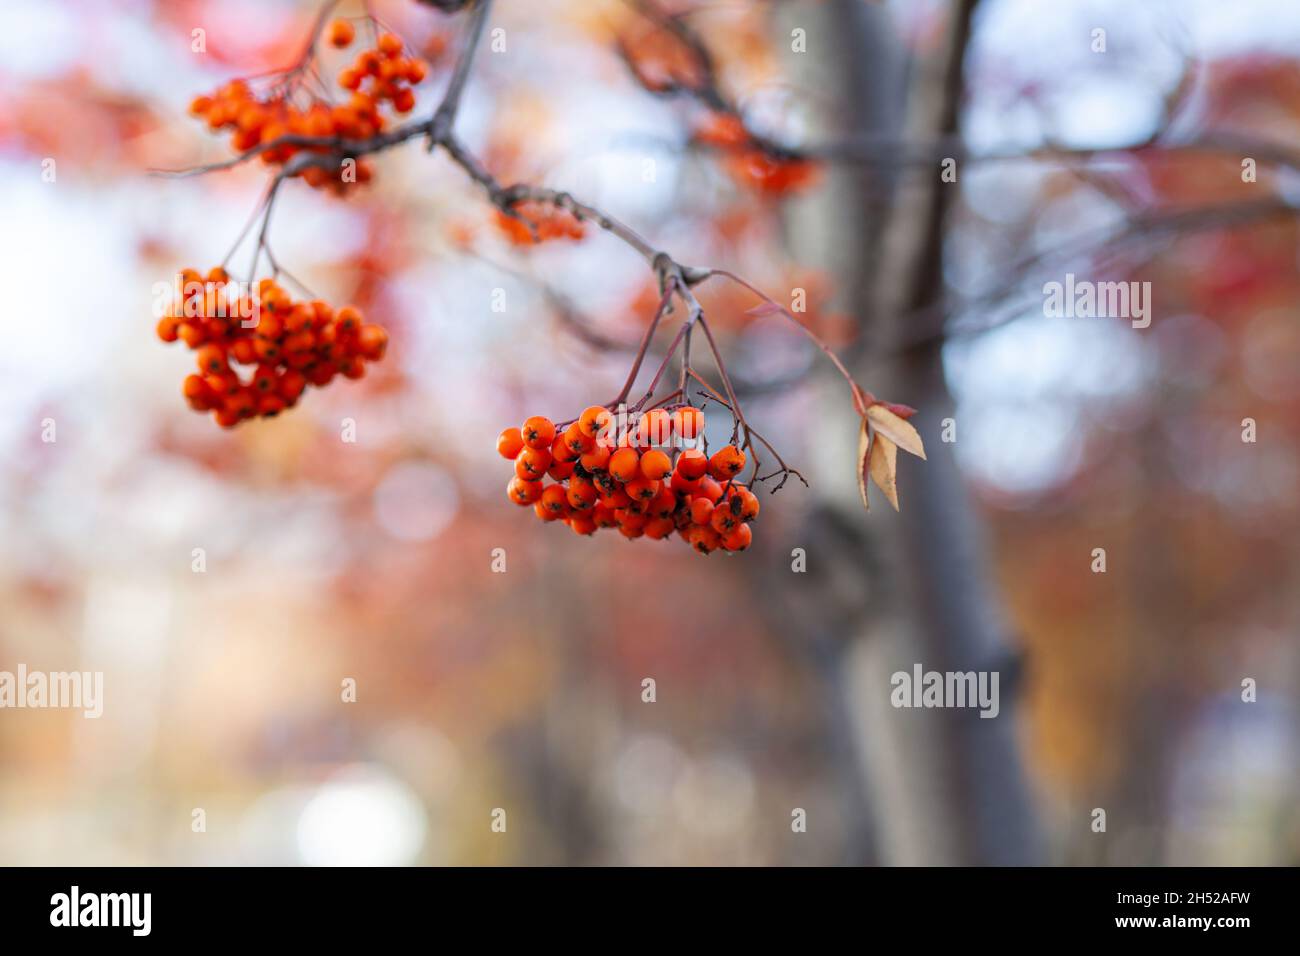 Berries of mountain ash branches are red on a blurry autumn background. Autumn harvest still life scene. Soft focus backdrop photography. Copy space. Stock Photo